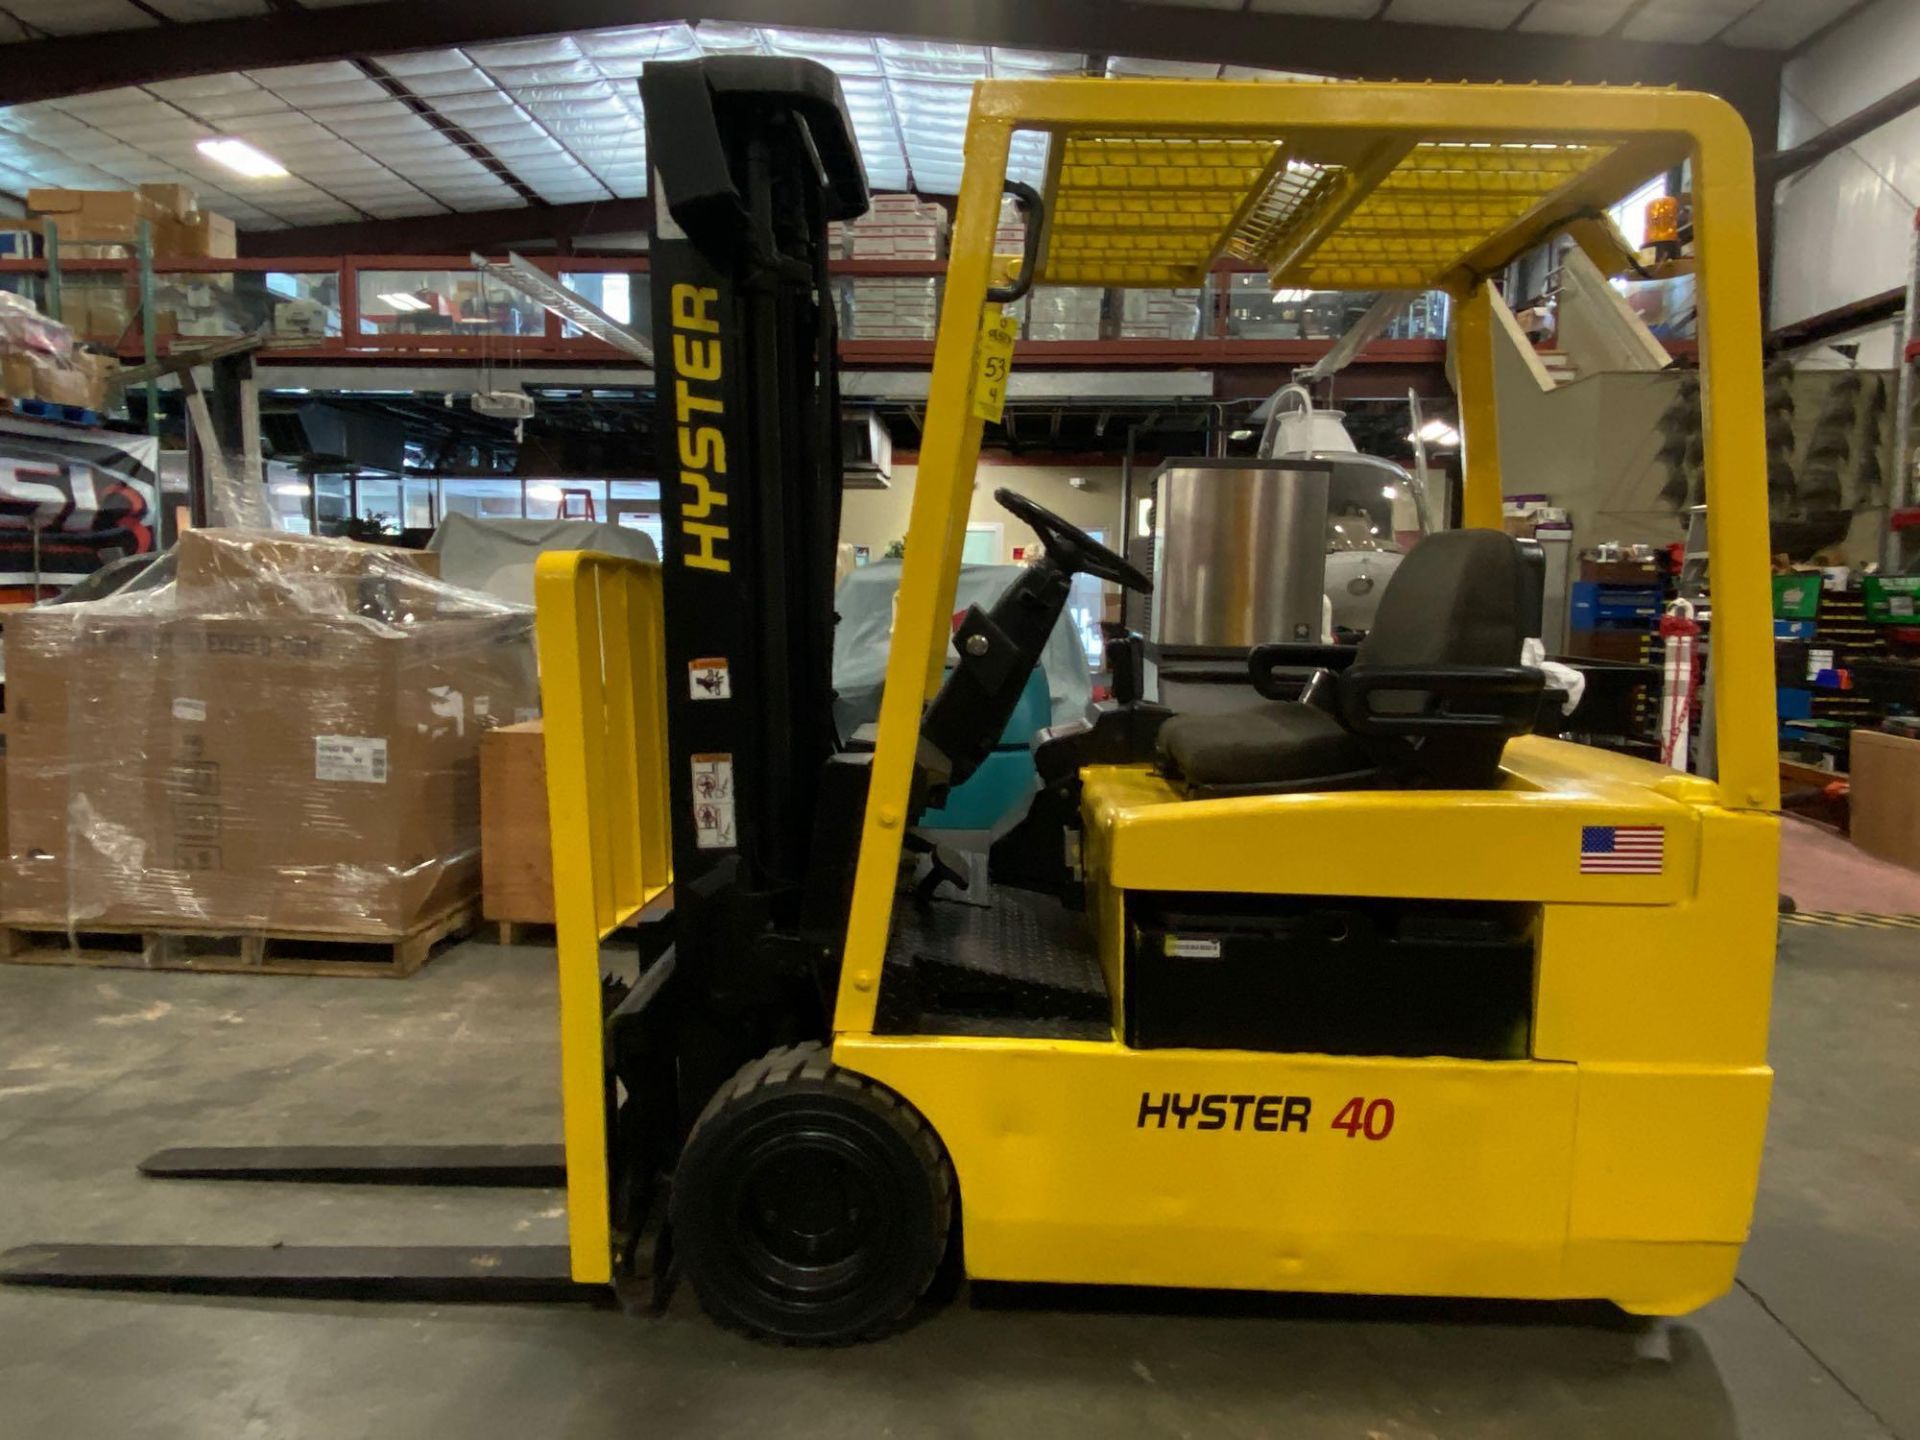 HYSTER J40XMT ELECTRIC FORKLIFT, APPROX 4,000 LB CAPACITY, TILT, SIDE SHIFT, 36V, RUNS AND OPERATES